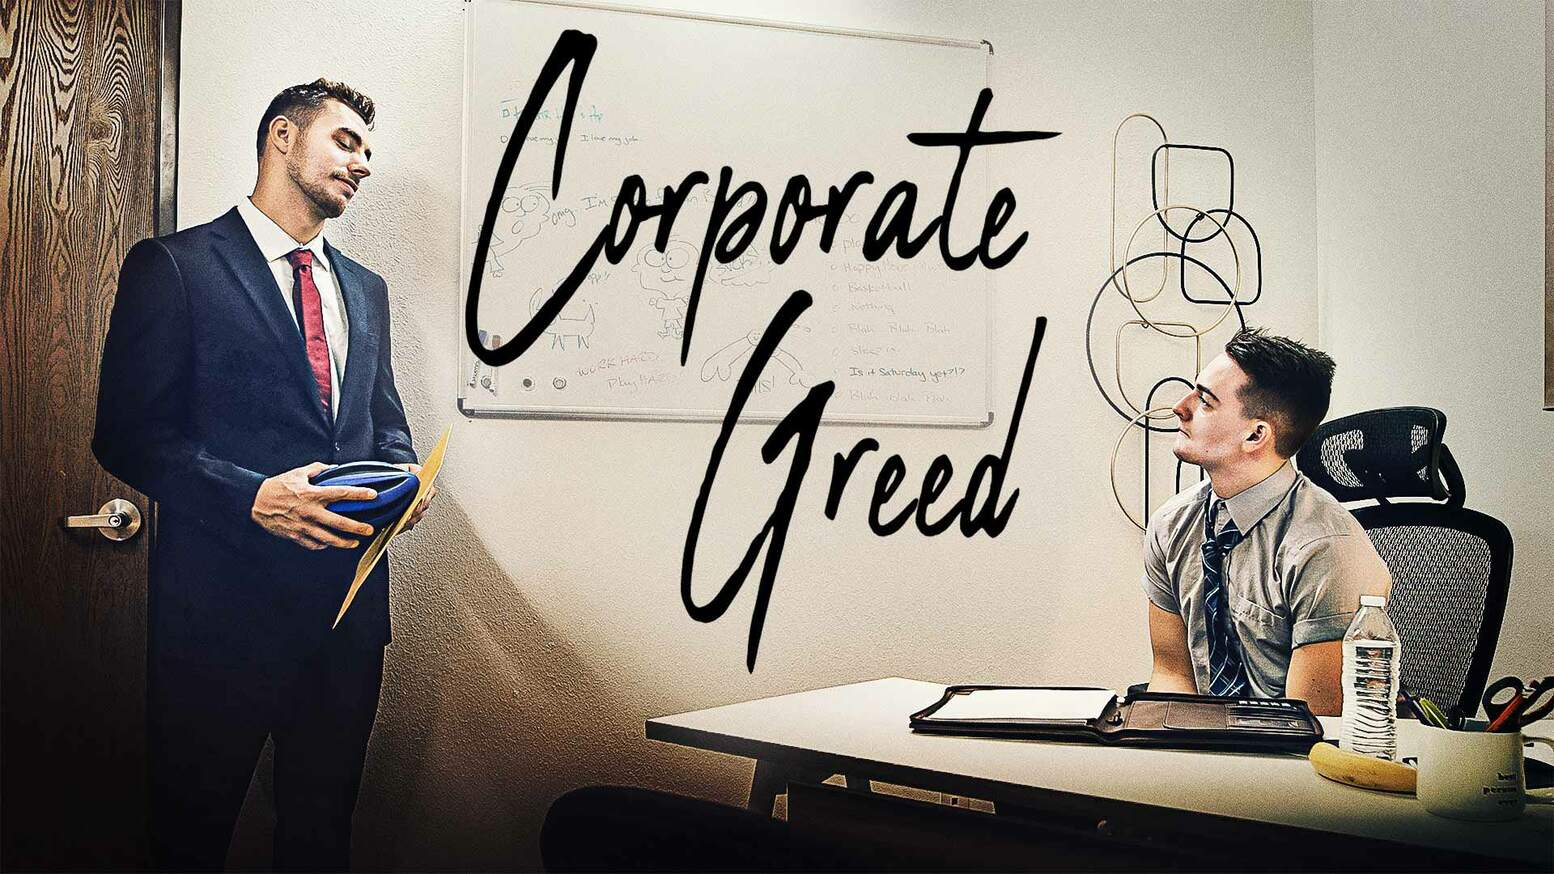 Corporate Greed